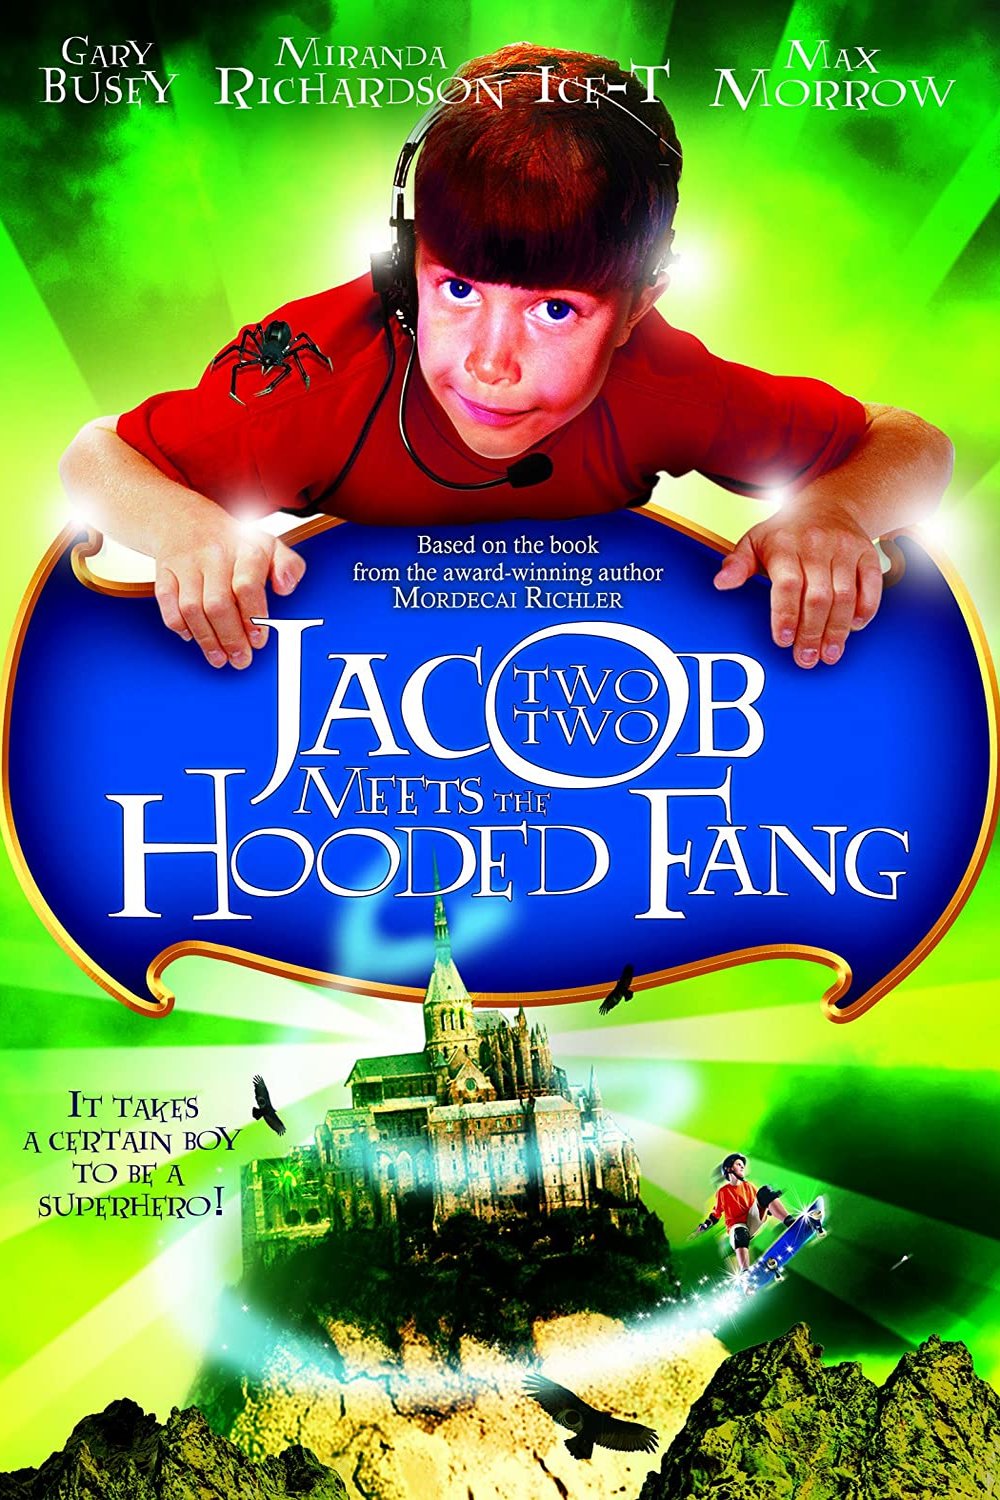 Poster of the movie Jacob Two Two Meets the Hooded Fang